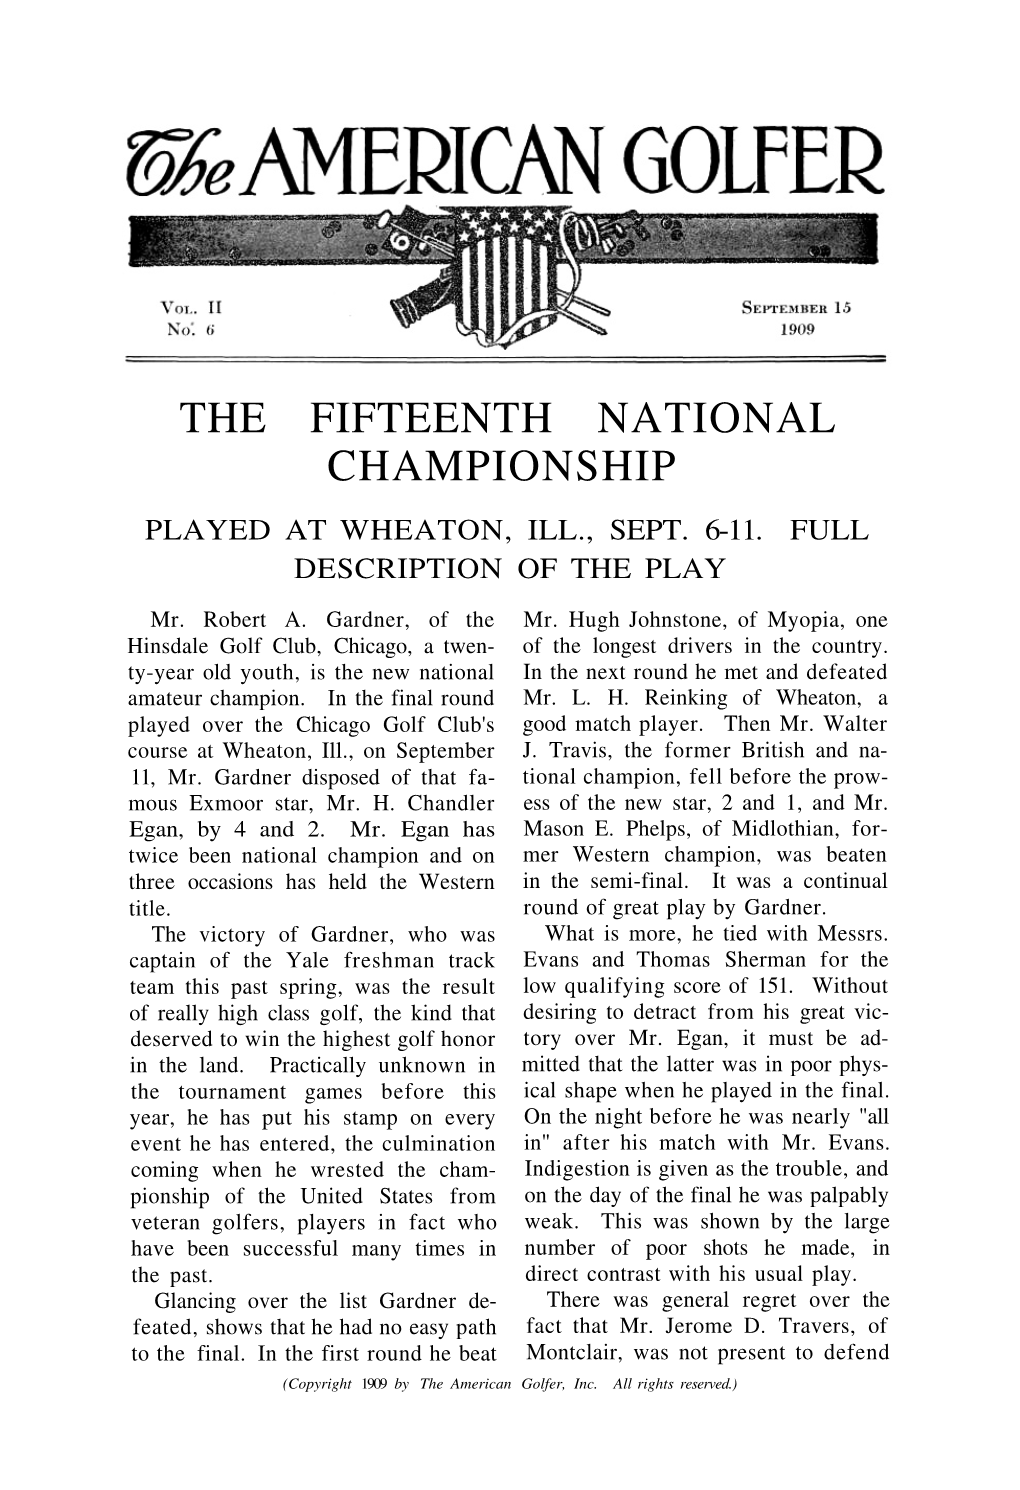 The Fifteenth National Championship Played at Wheaton, Ill., Sept